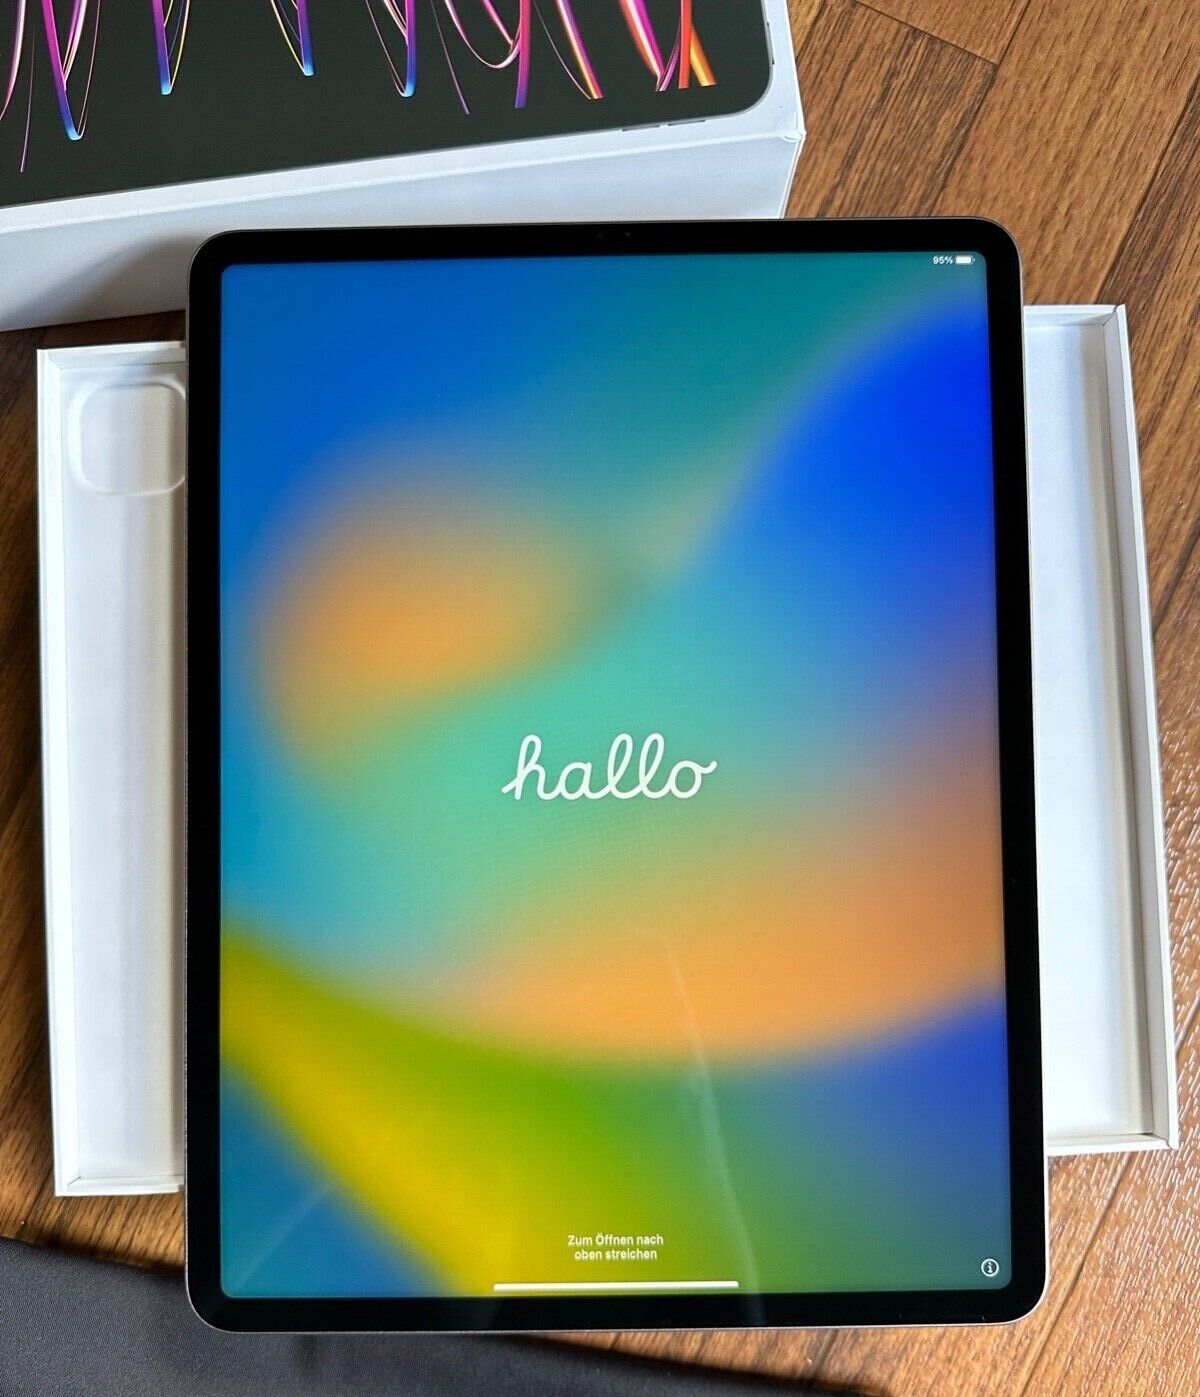 2023 Apple iPad Pro 12.9 Inch M2 chip 6th gen with Wi-Fi 128GB Space Gray